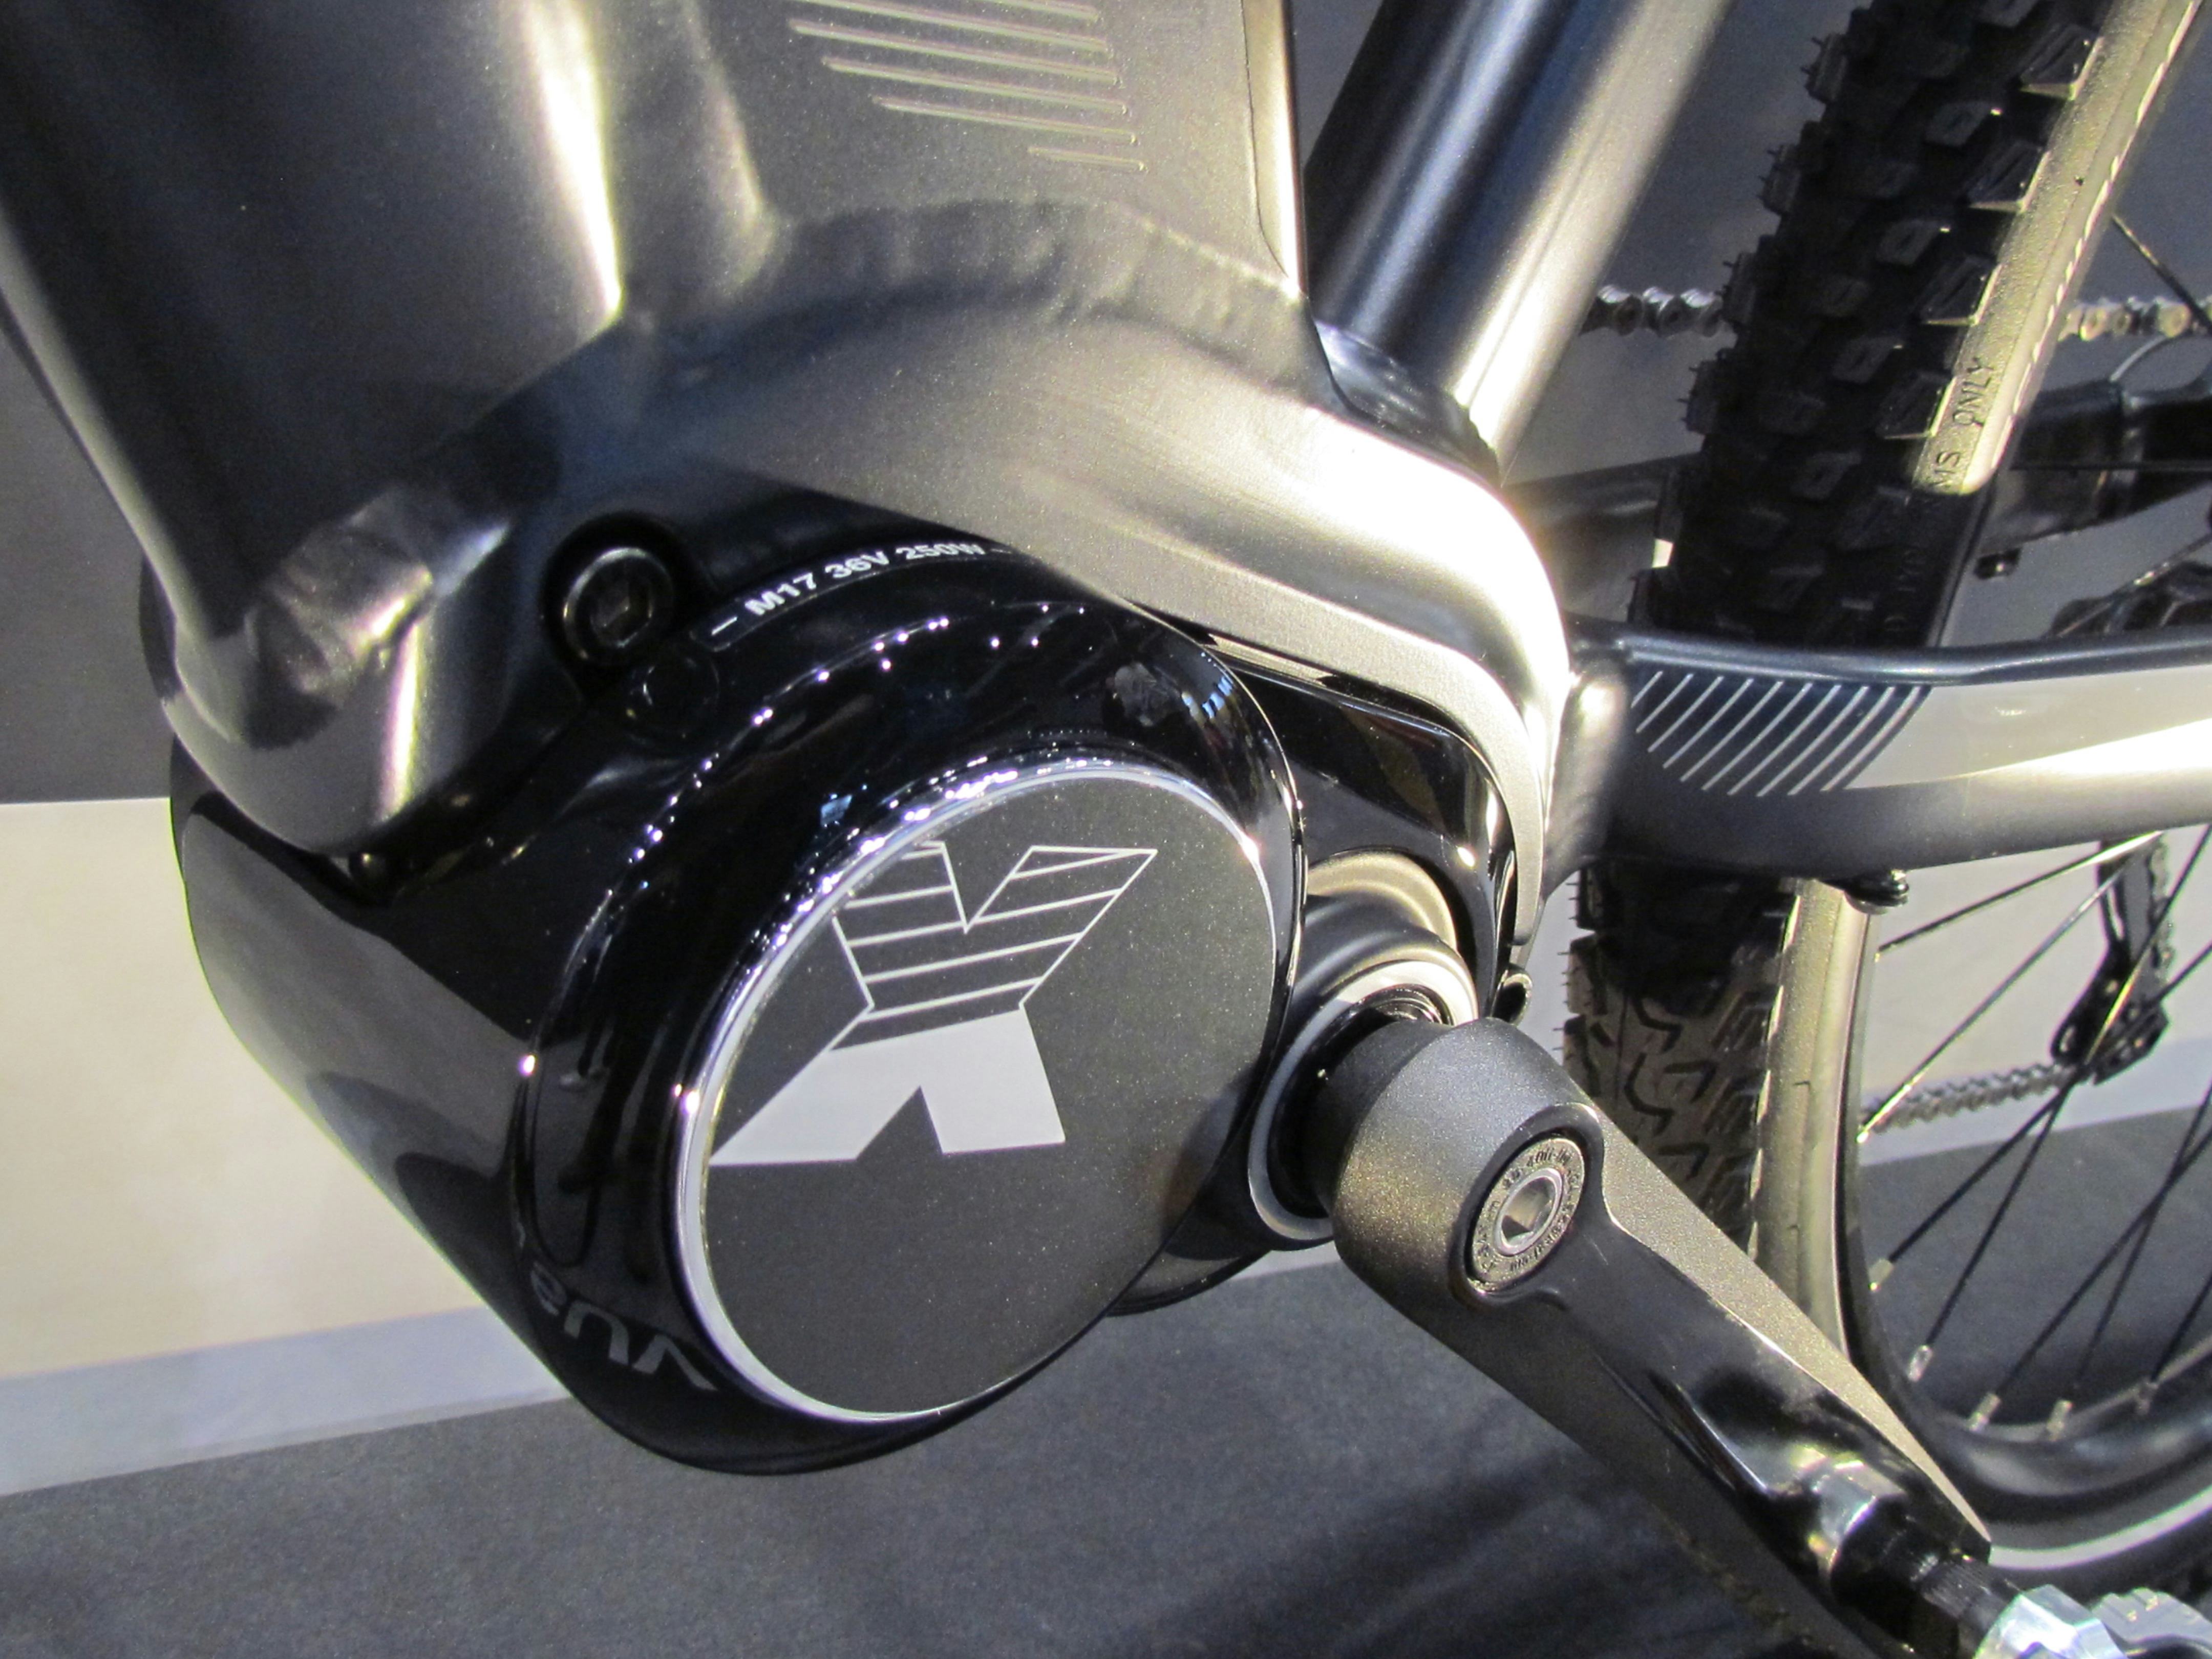 New TranzX M17 drive offers 85Nm for which it is for eMTBs. – Photos Bike Europe